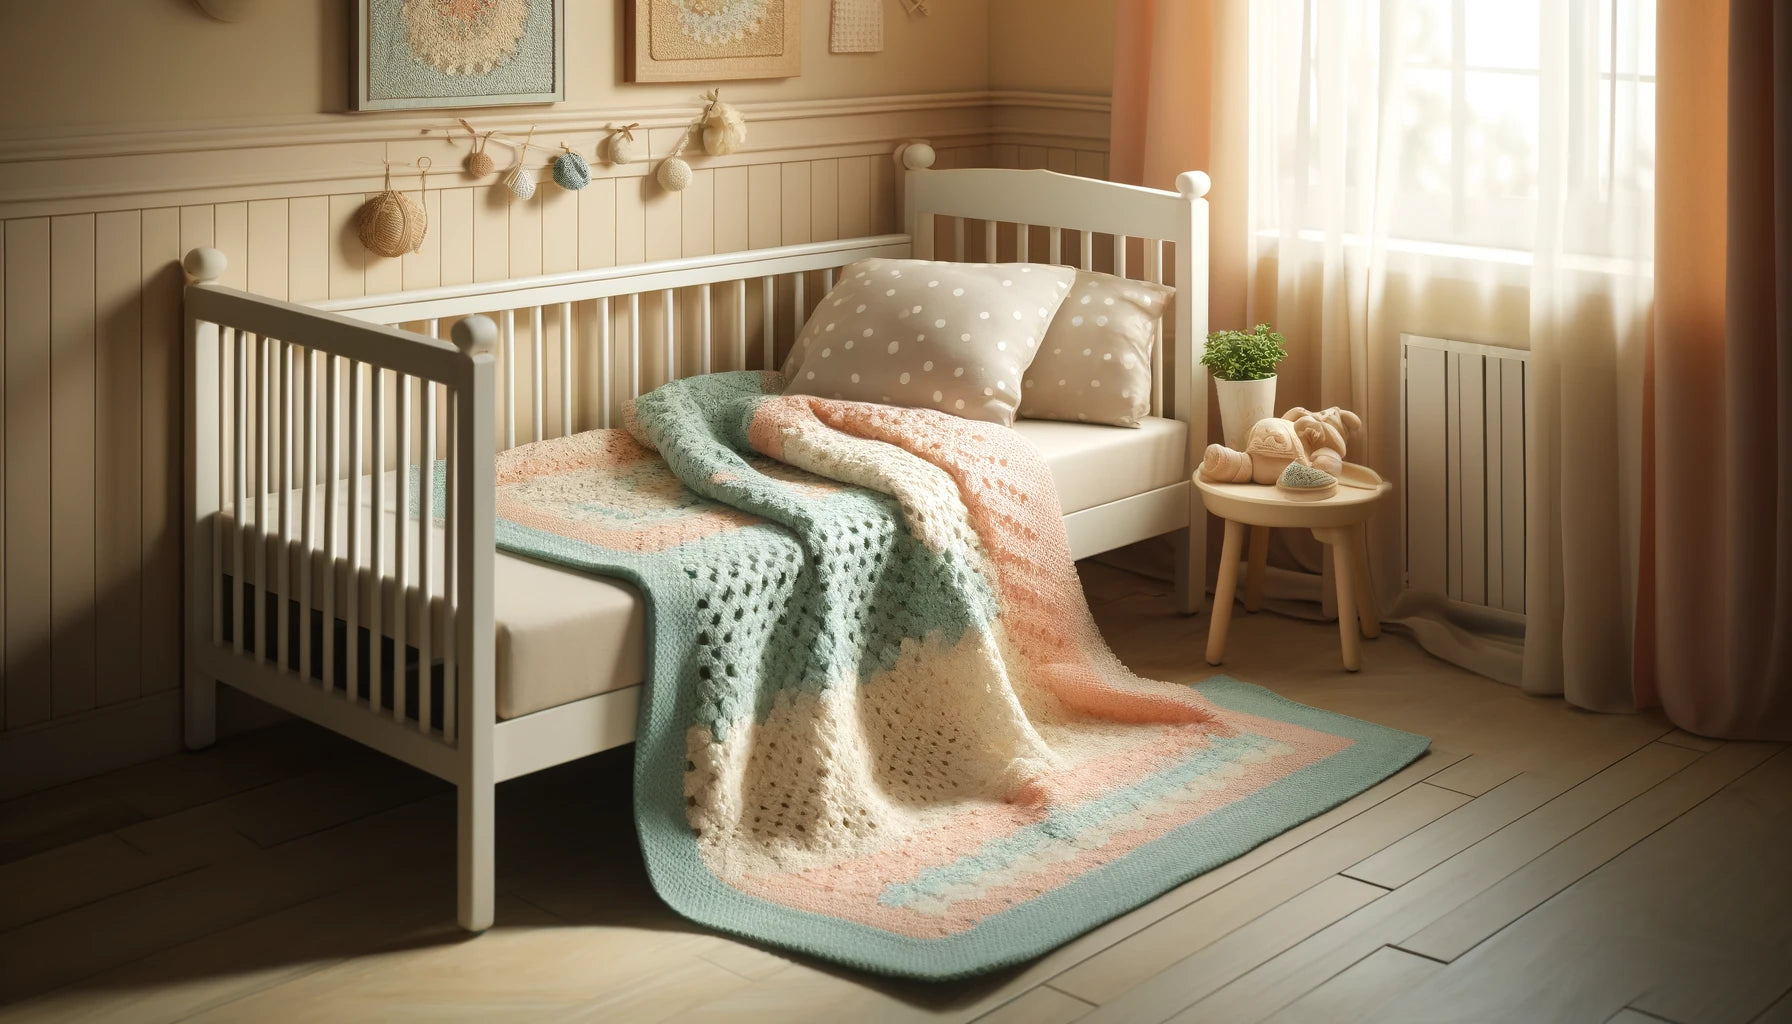 How to Crochet a Baby Blanket: A Step-by-Step Guide